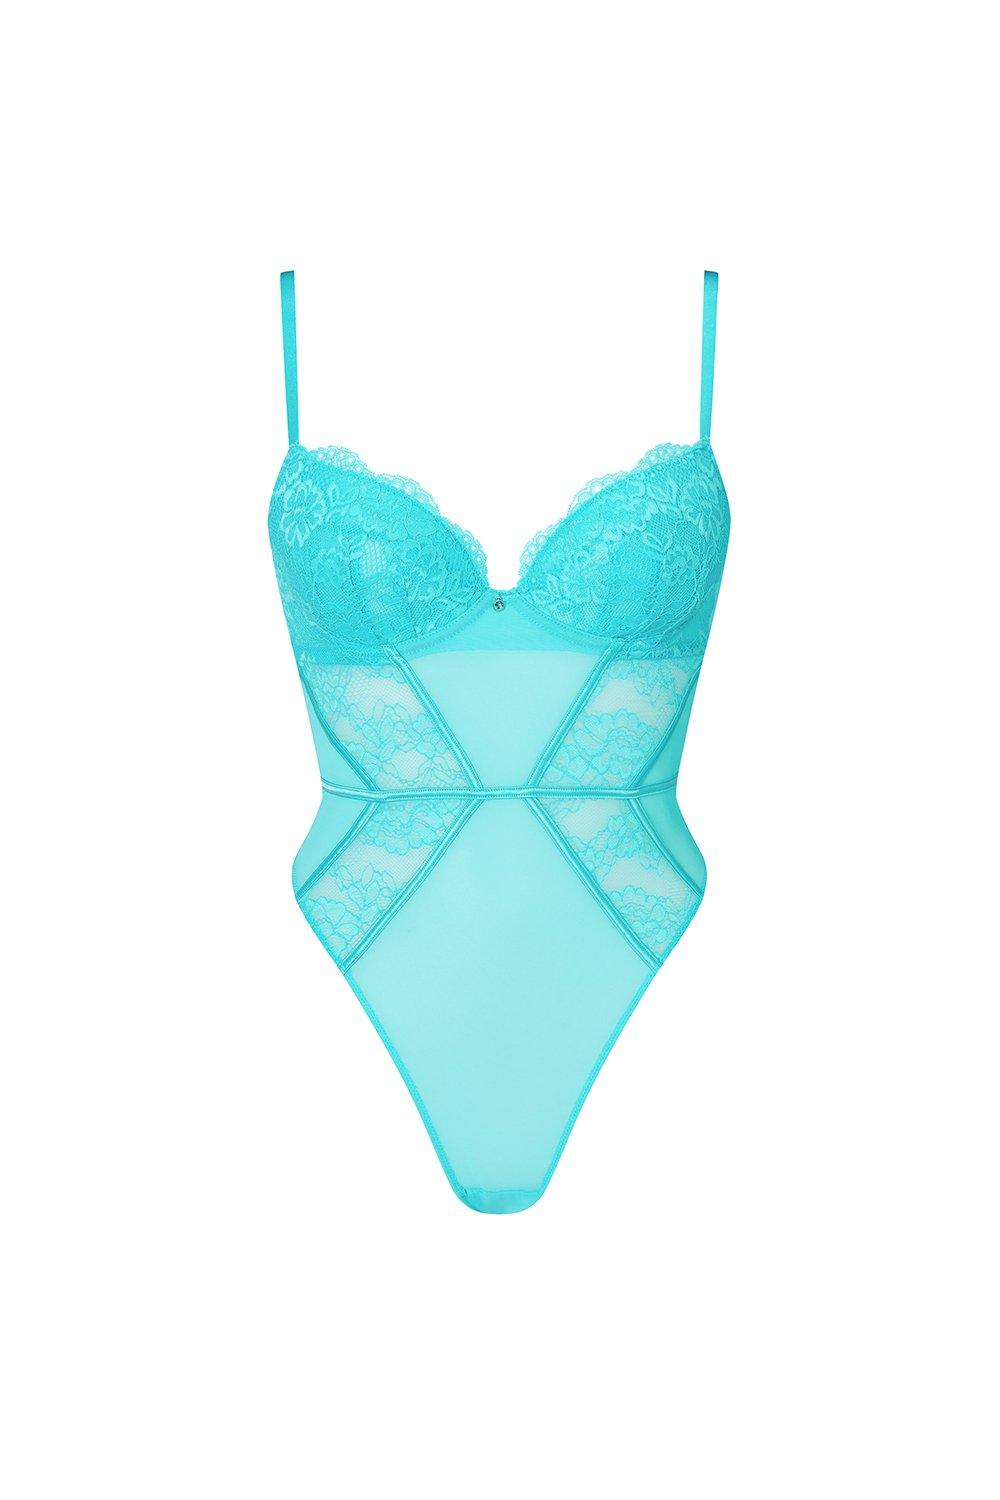 Ann Summers Hold Me Tight Underwire Lace Bodysuit In Teal-Green